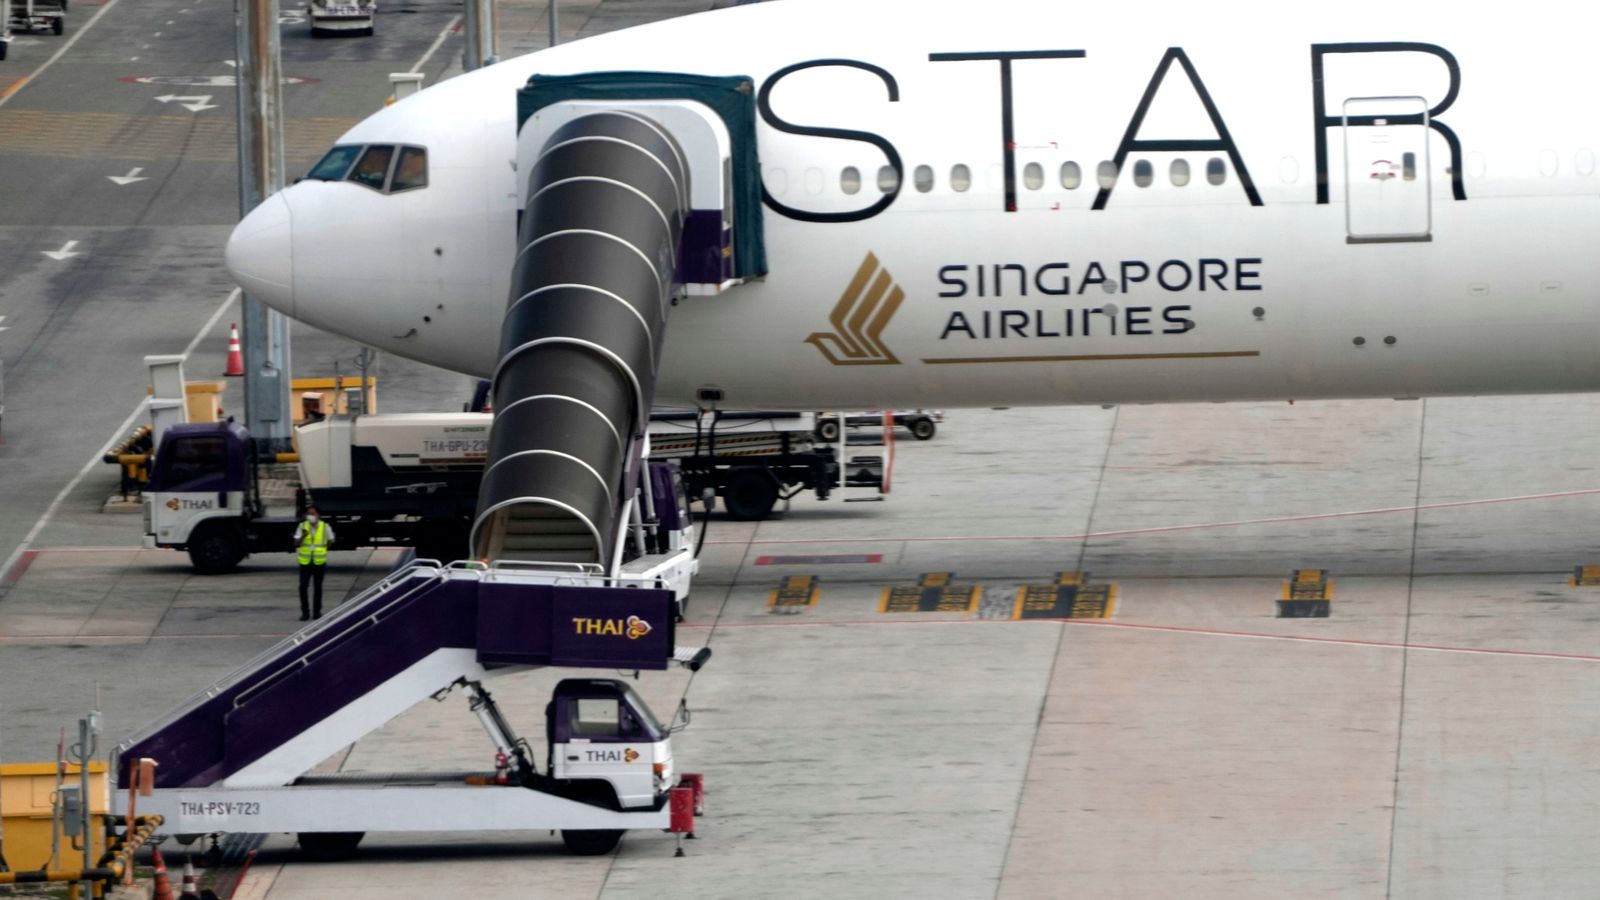 Singapore Airlines turbulence: People seriously injured on fatal flight need 'spinal operations', hospital says